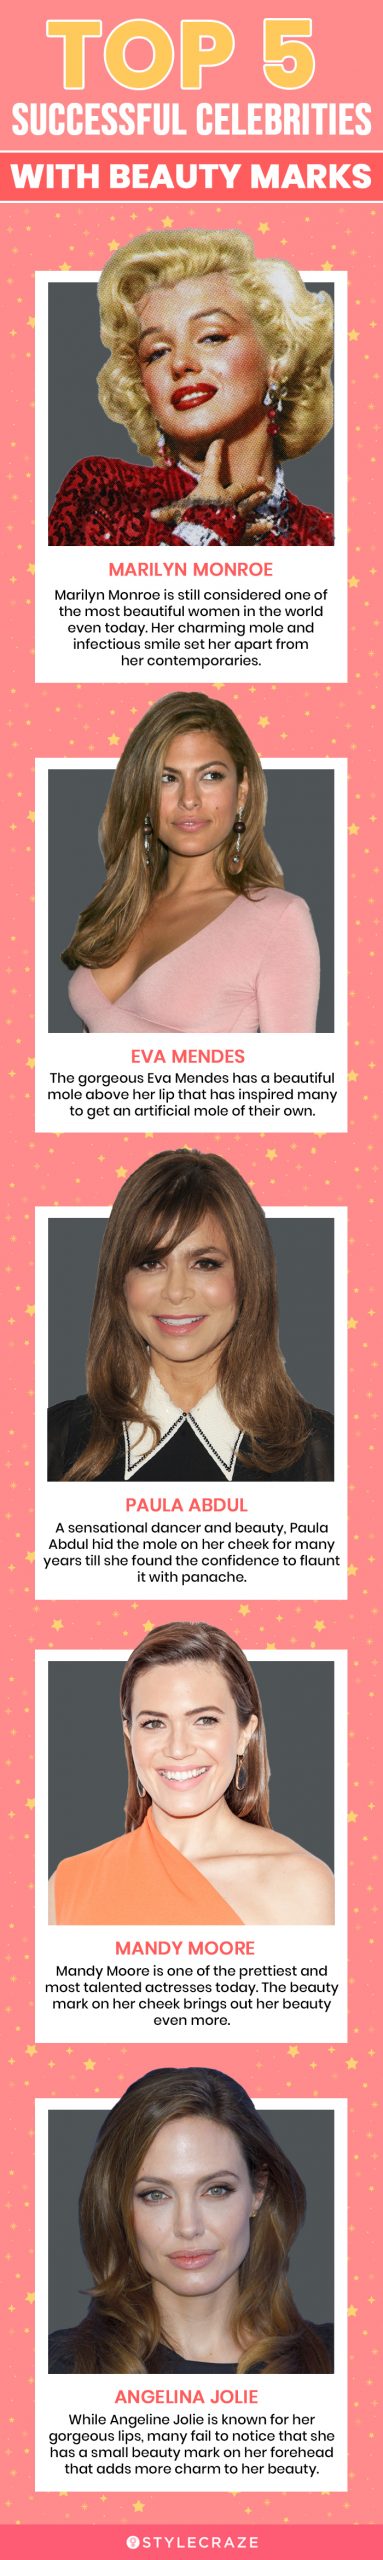 top 5 successful celebrities with beauty marks (infographic)